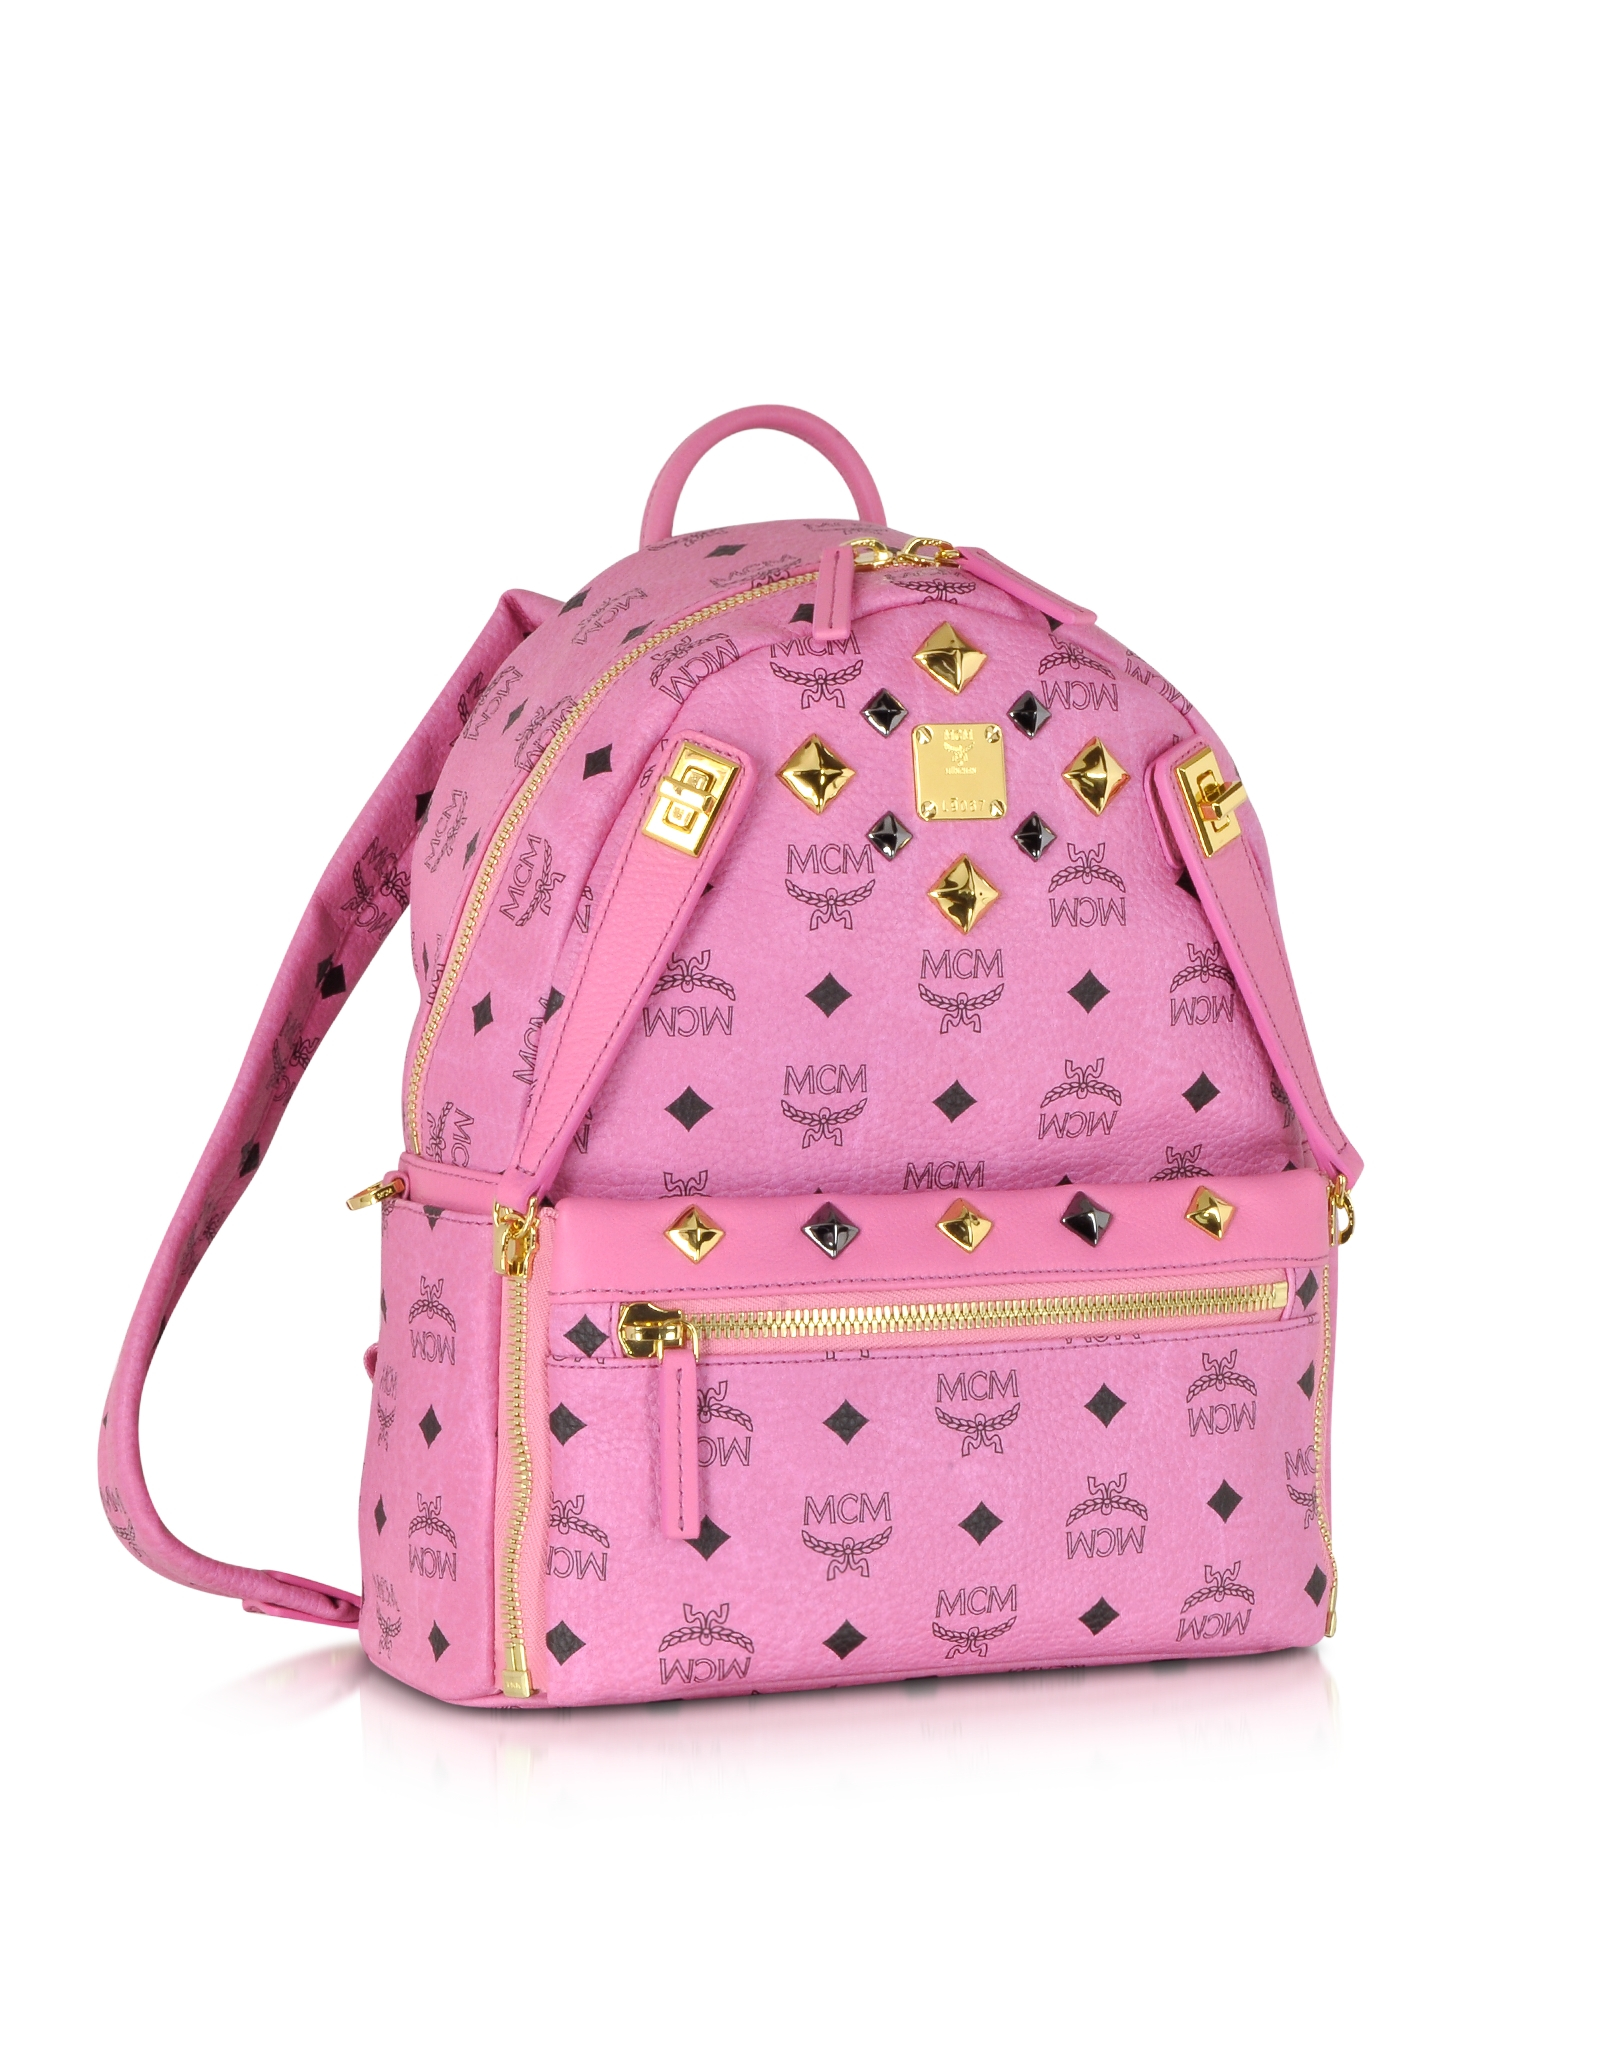 MCM Pink Small Dual Stark Backpack in Pink - Lyst